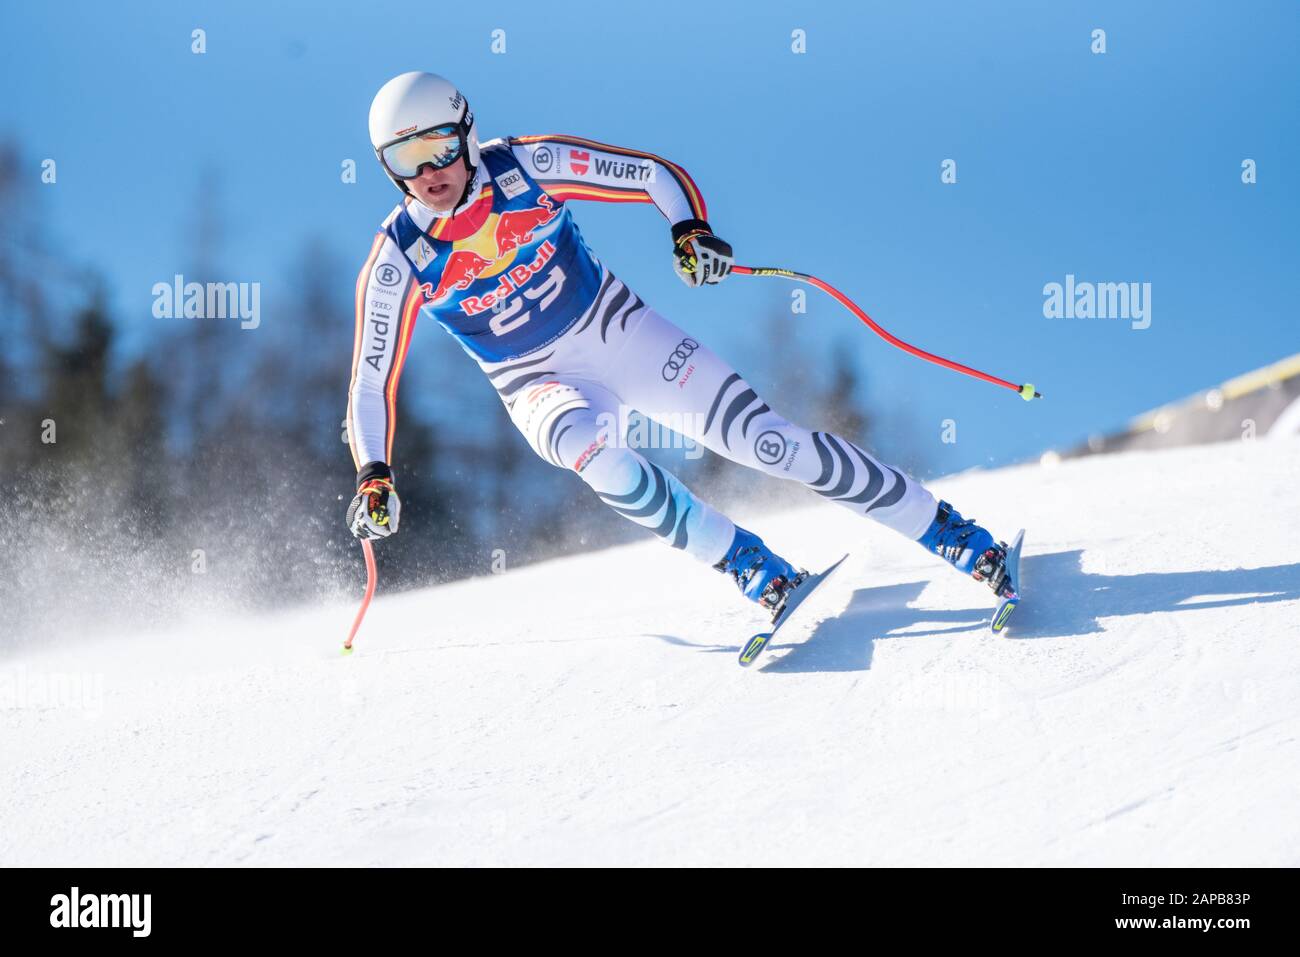 Romed Baumann of Germany at the Ski Alpin: 80. Hahnenkamm Race 2020 - Audi FIS Alpine Ski World Cup - Men's Downhill Training at the Streif on January 22, 2020 in Kitzbuehel, AUSTRIA. (Photo by Horst Ettensberger/ESPA-Images) Stock Photo